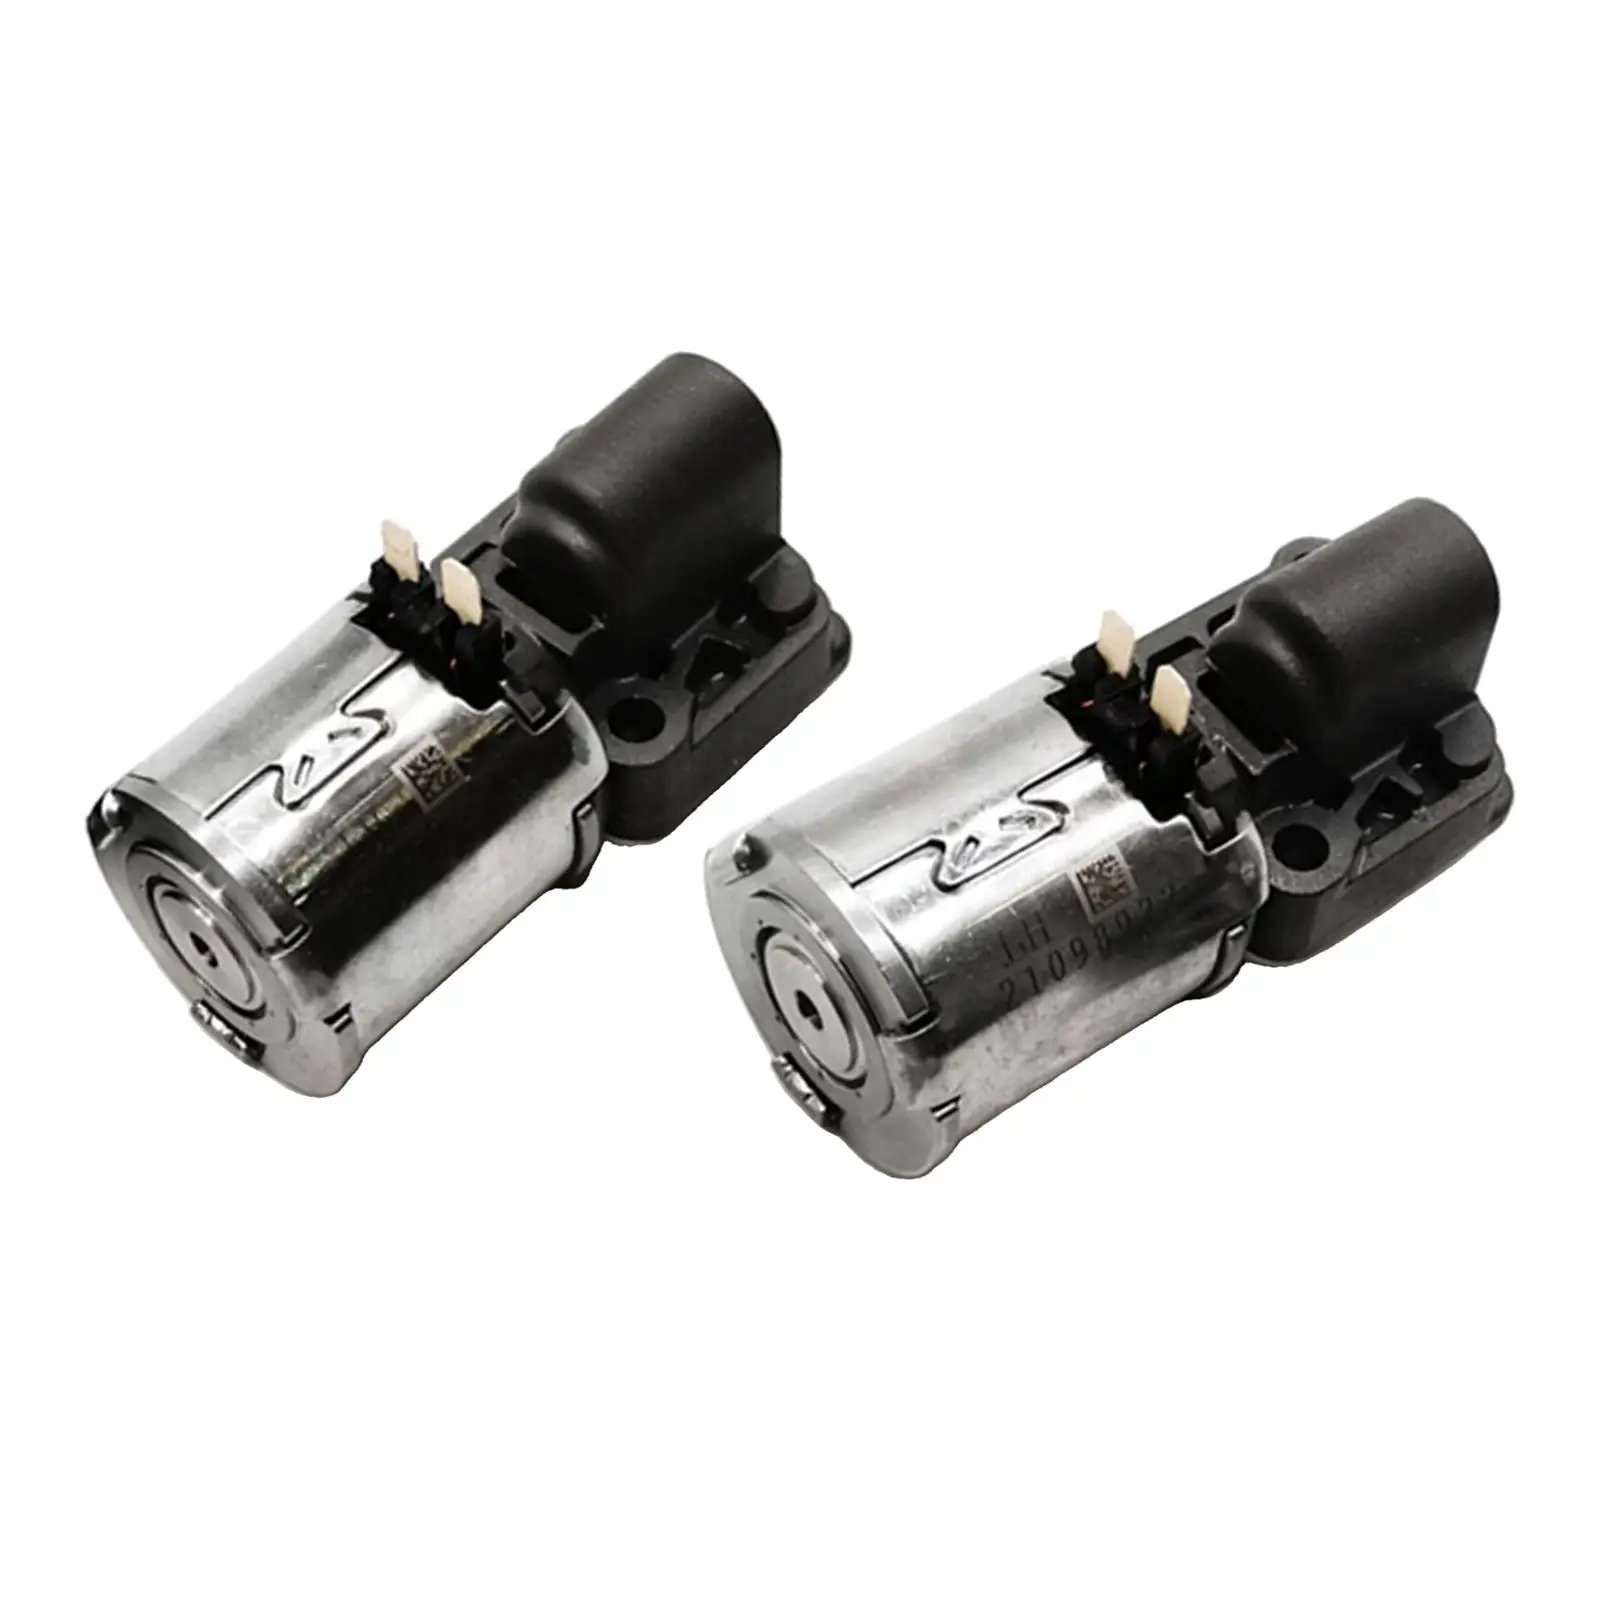 Set of 2 Engine Transmission Solenoid 0BH Dq500 Solenoid Valve for Audi A4 A5 A6 A7 Q5 2008-11 7 SP